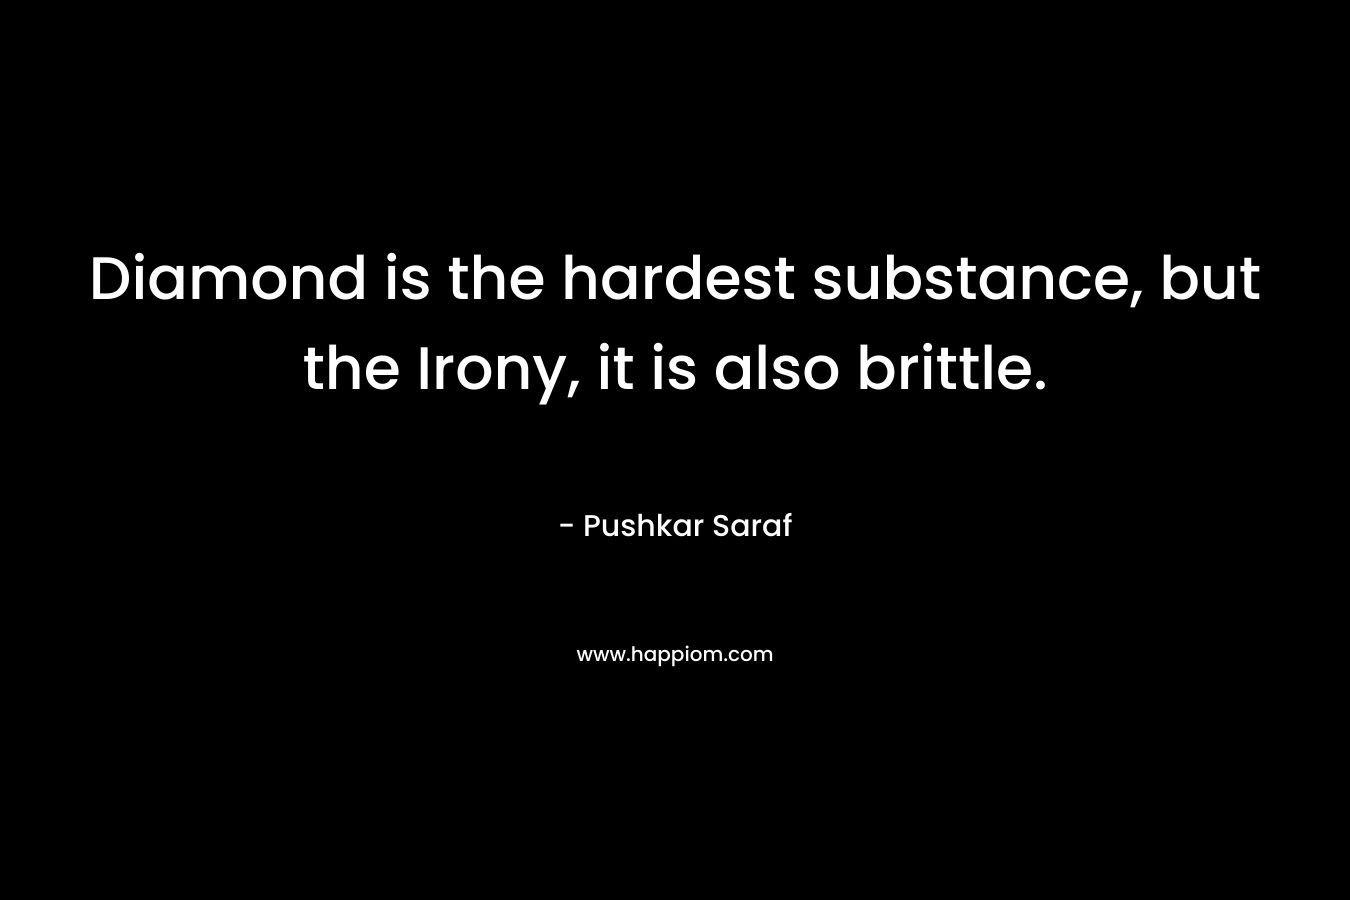 Diamond is the hardest substance, but the Irony, it is also brittle. – Pushkar Saraf